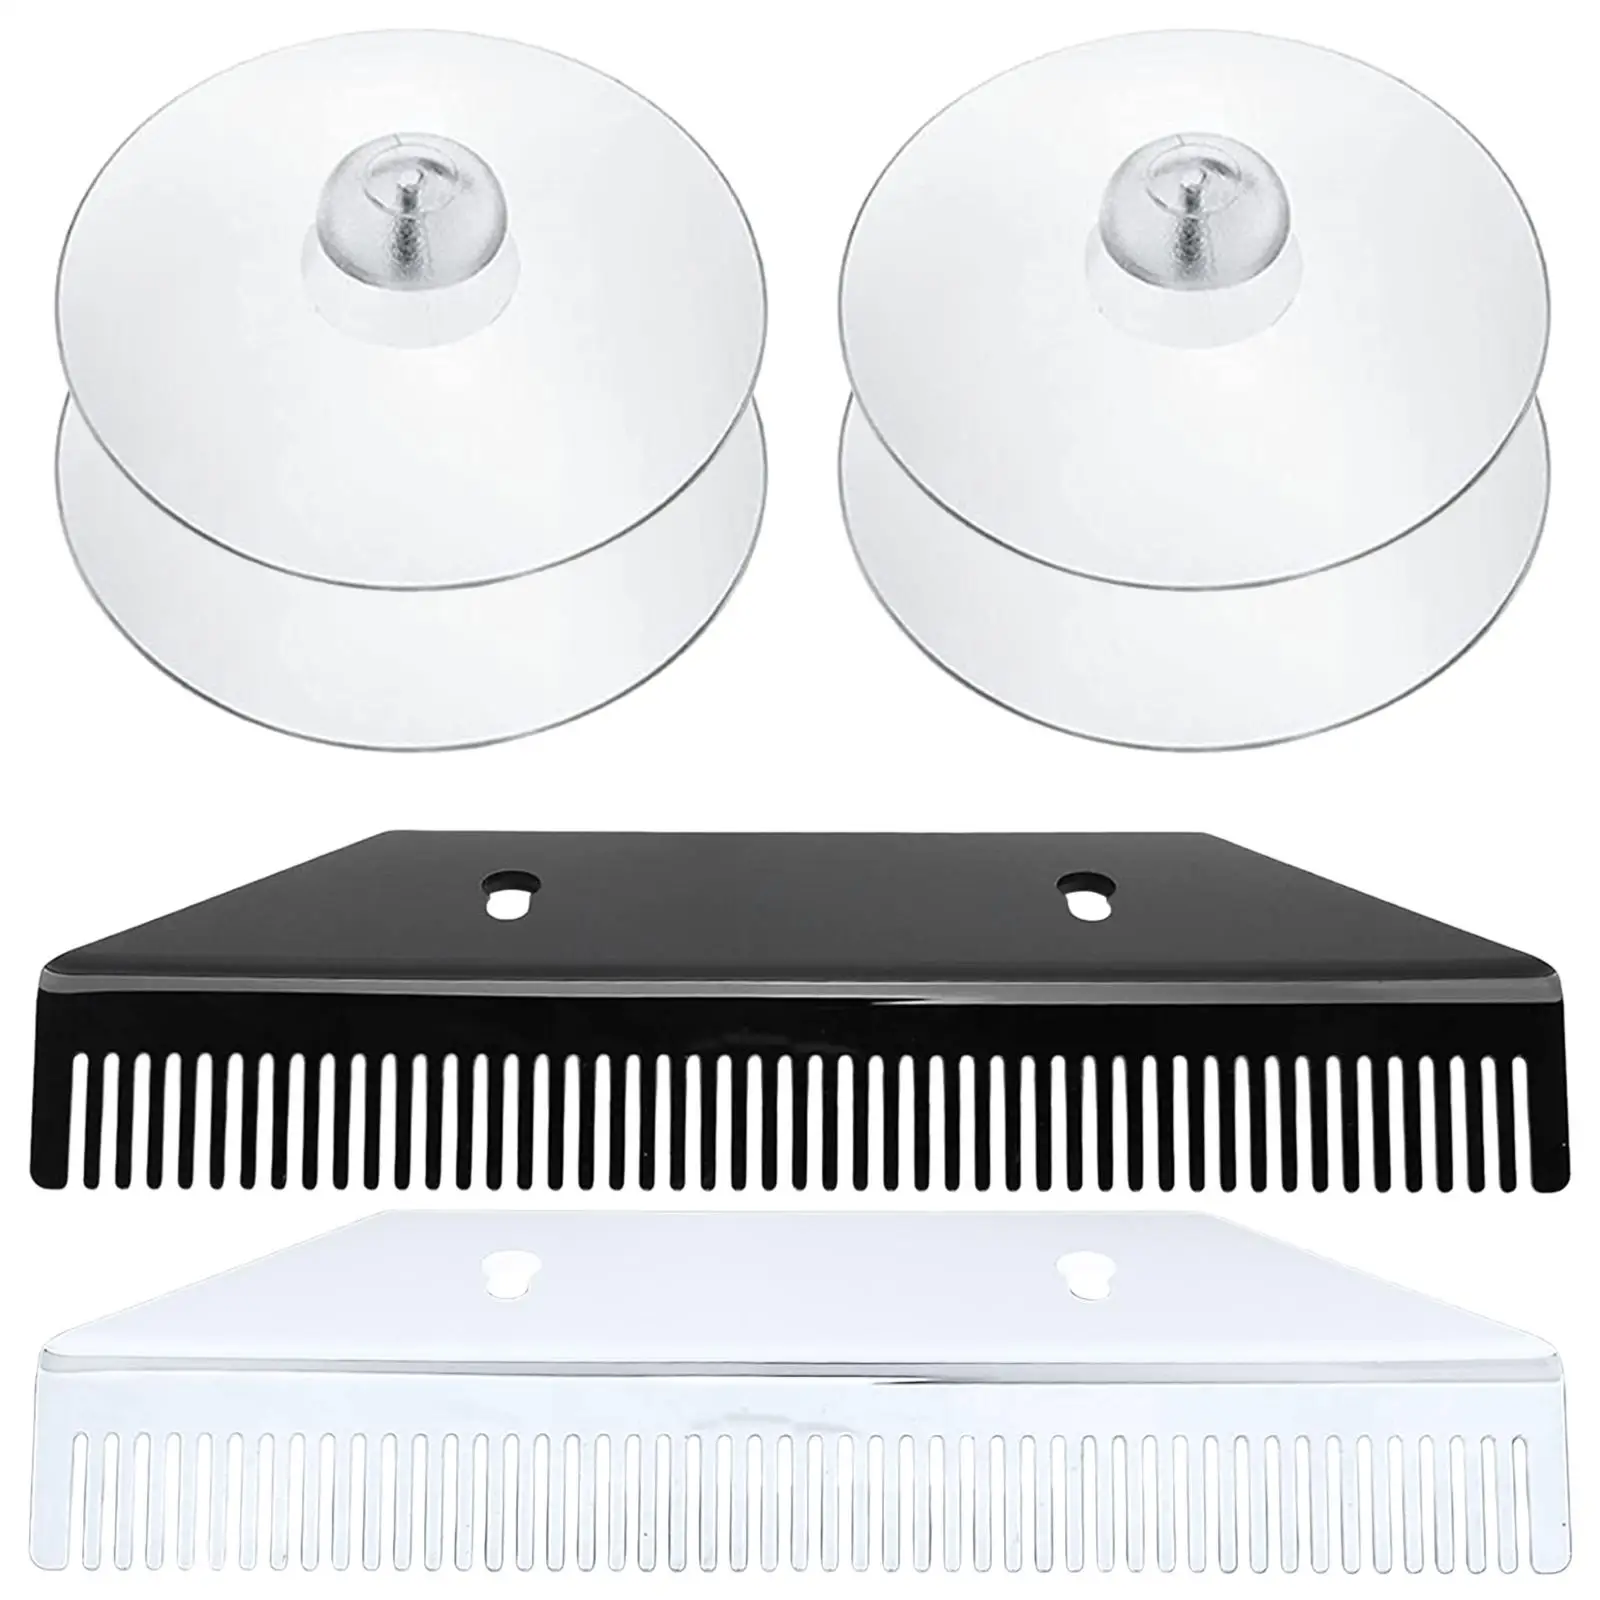 Hair Extension Holder Wide Wall Mounted Durable Wear-Resistant for Shop Home Barber Adult